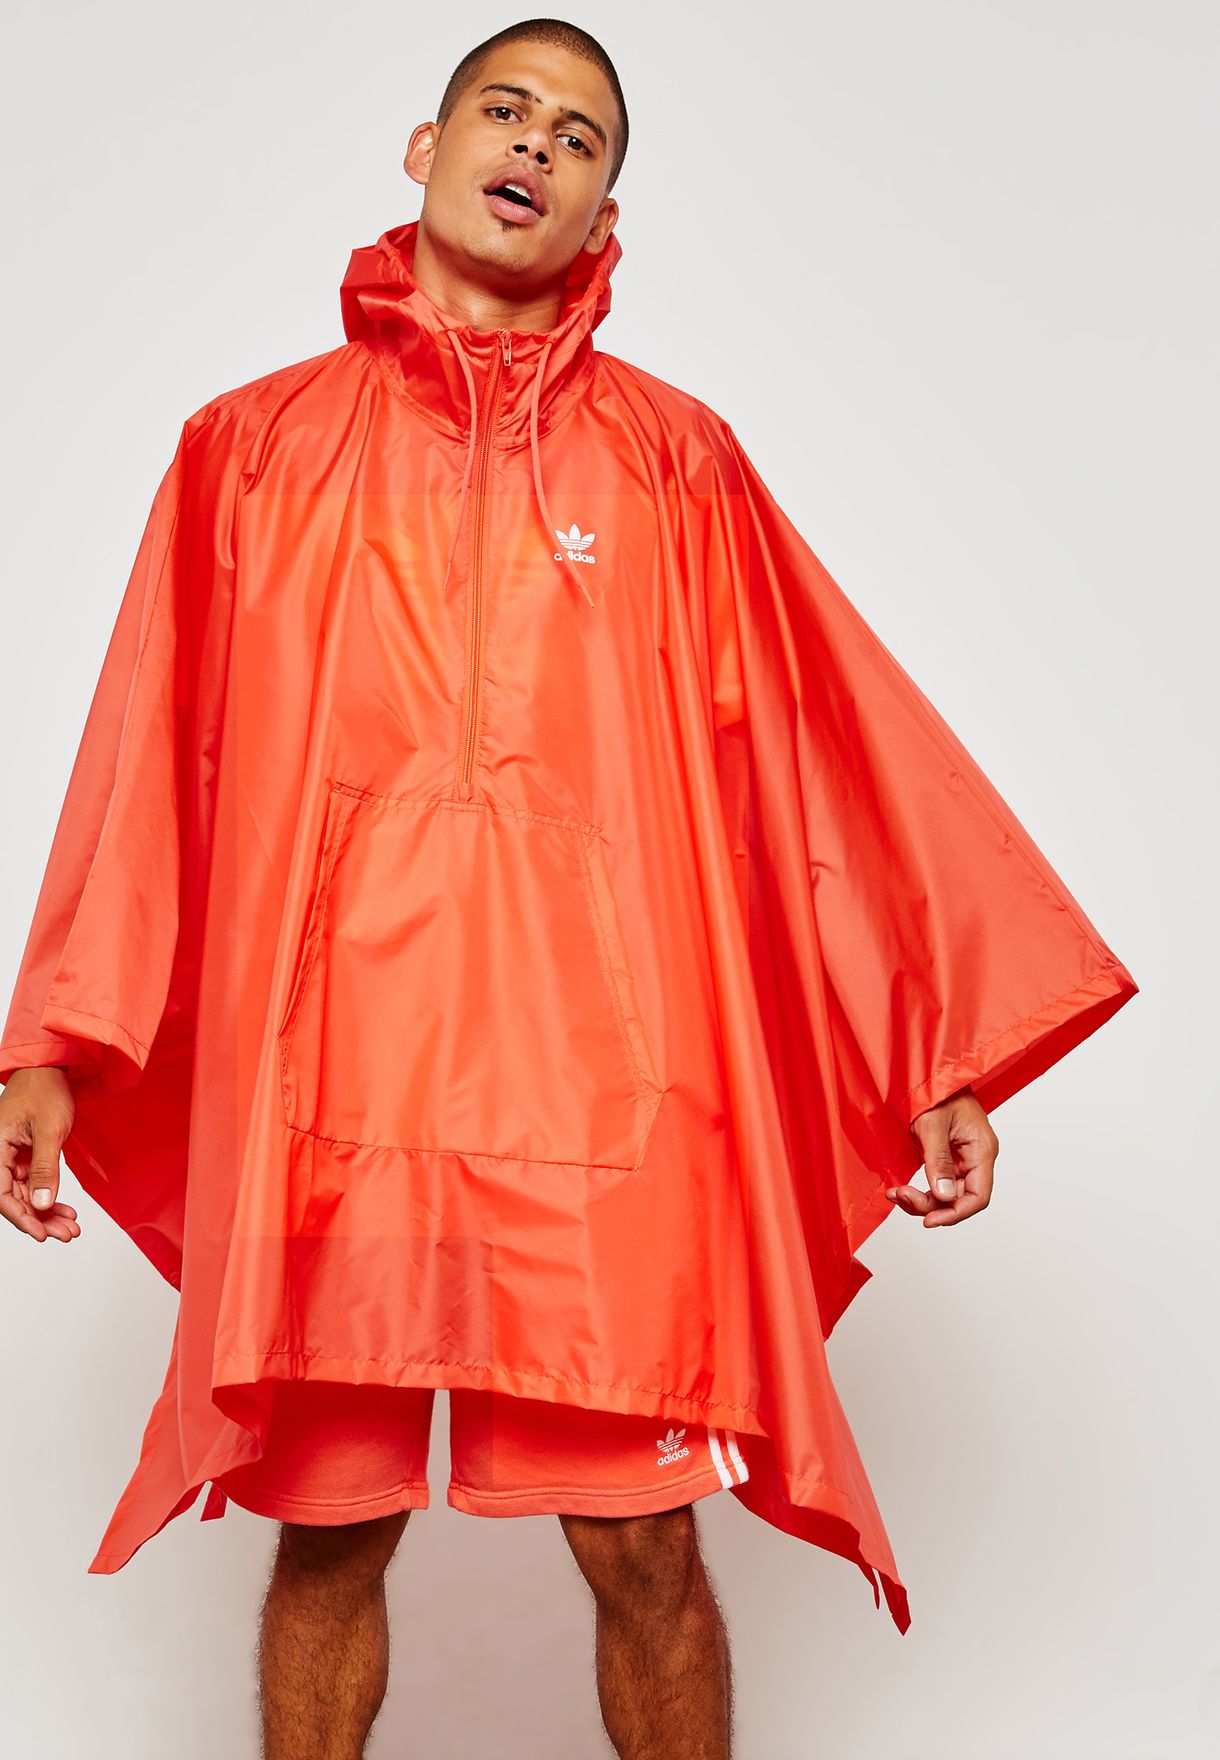 Buy adidas Originals red Trefoil Poncho Jacket for Men in MENA, Worldwide |  DH5817